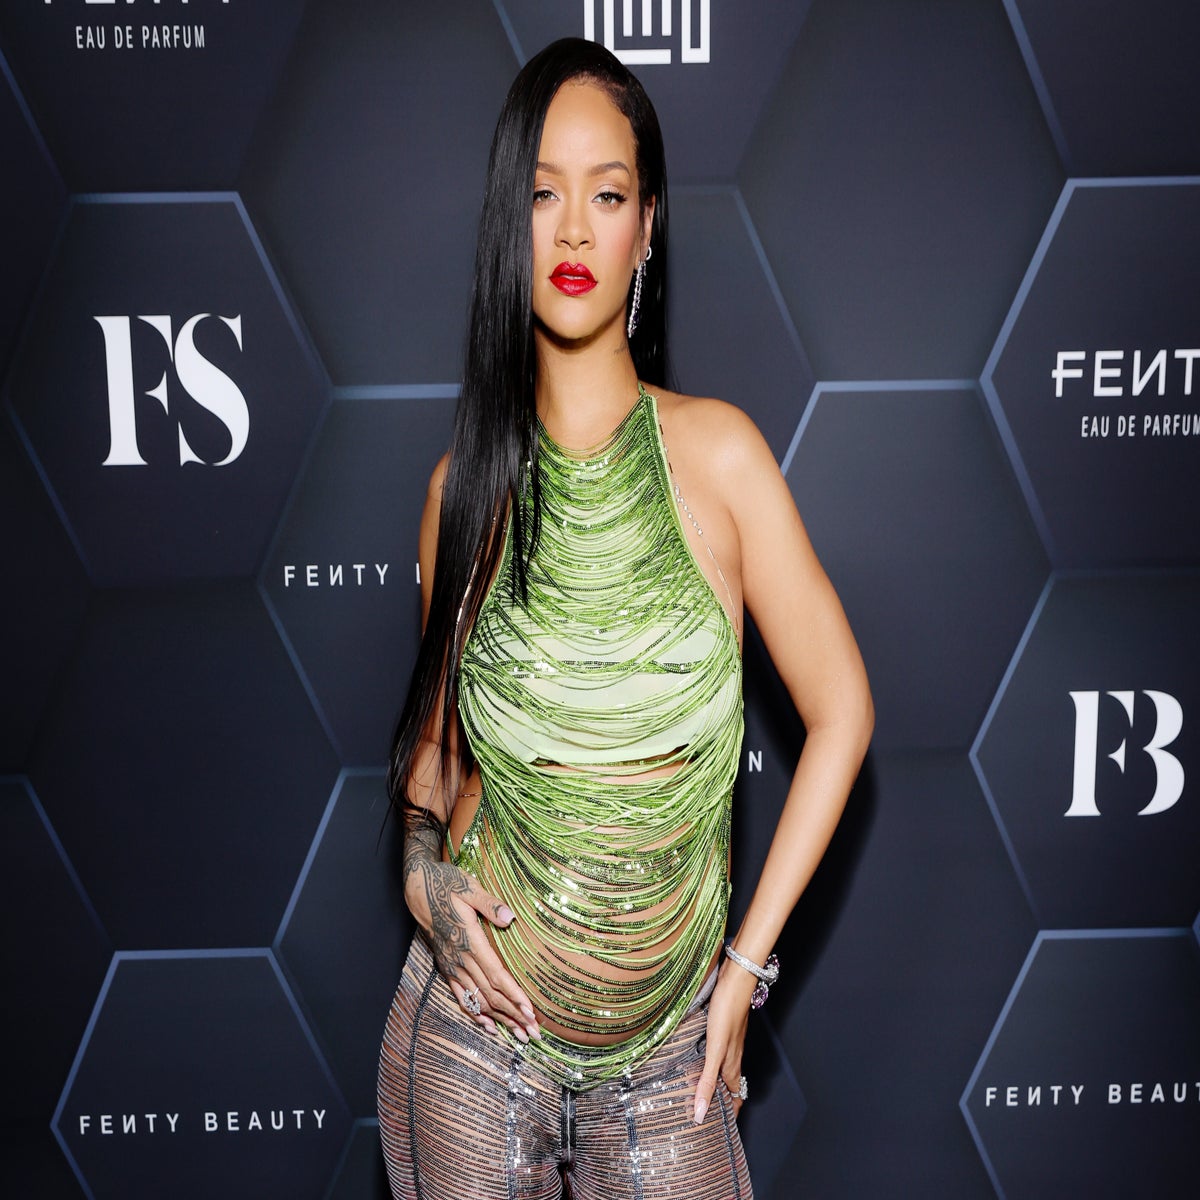 Rihanna Is Officially A Billionaire At 33 Years Old, According To